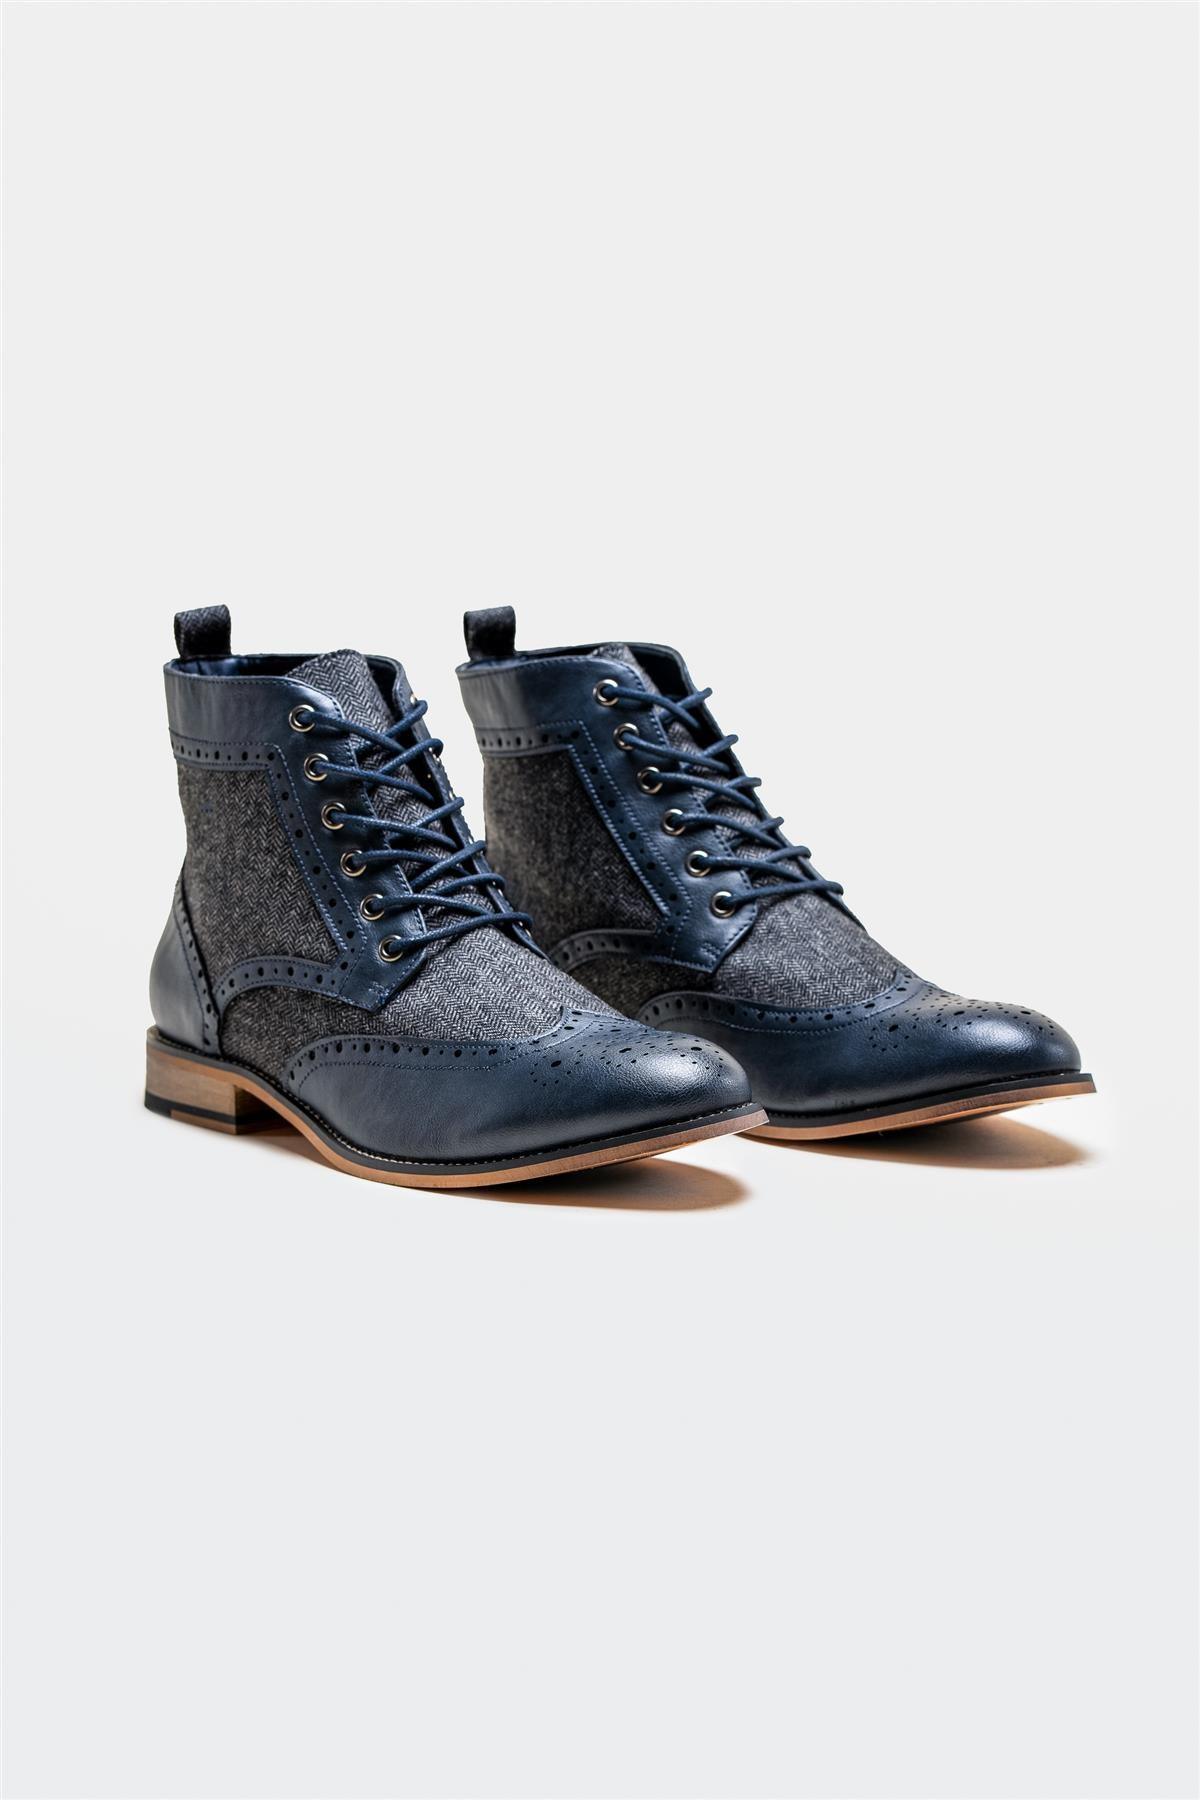 Sherlock navy lace up boot front